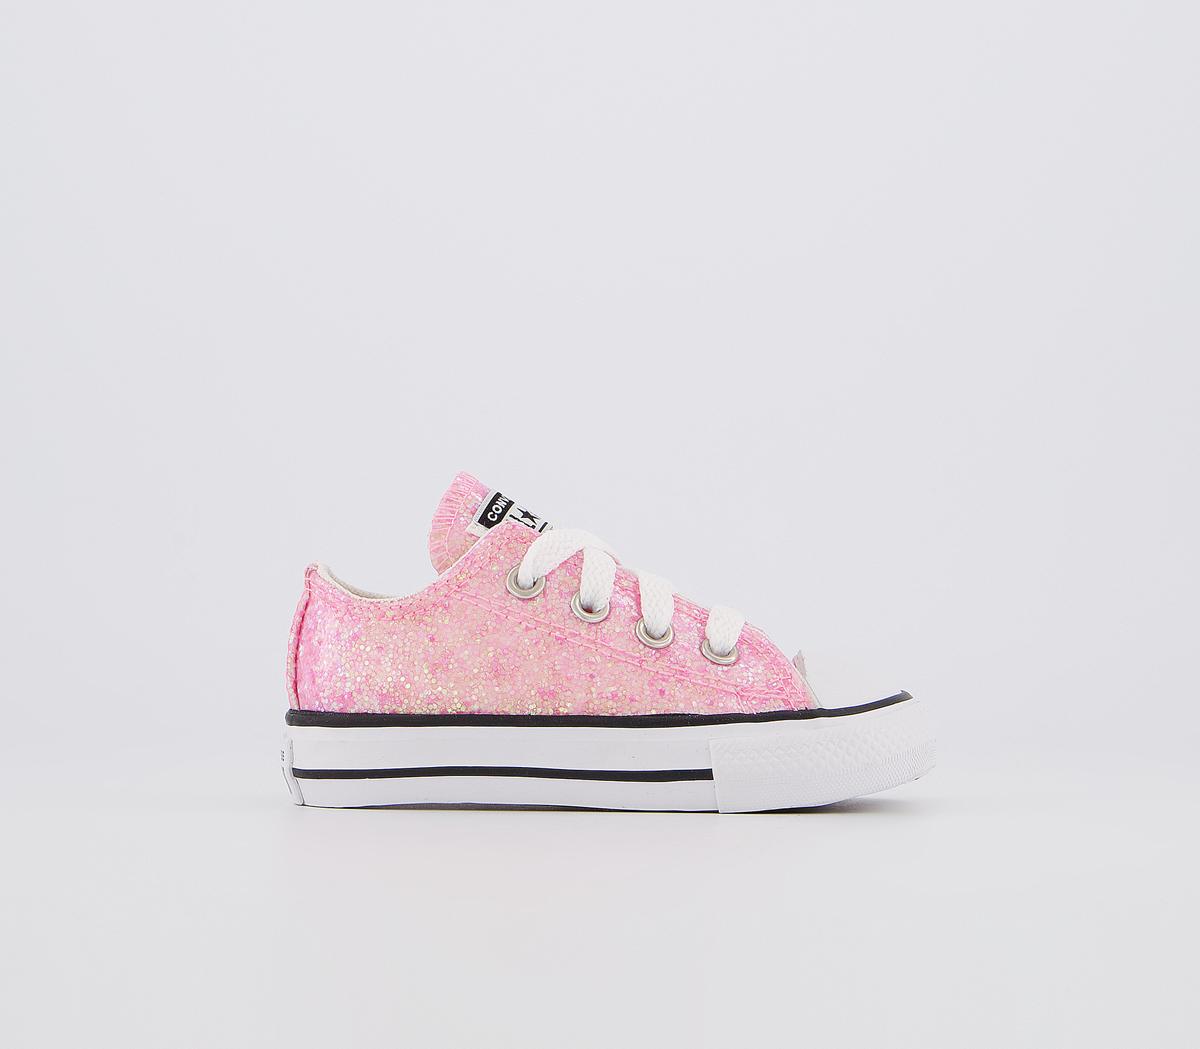 ConverseAllstar Low Infant TrainersPink Glitter Exclusive